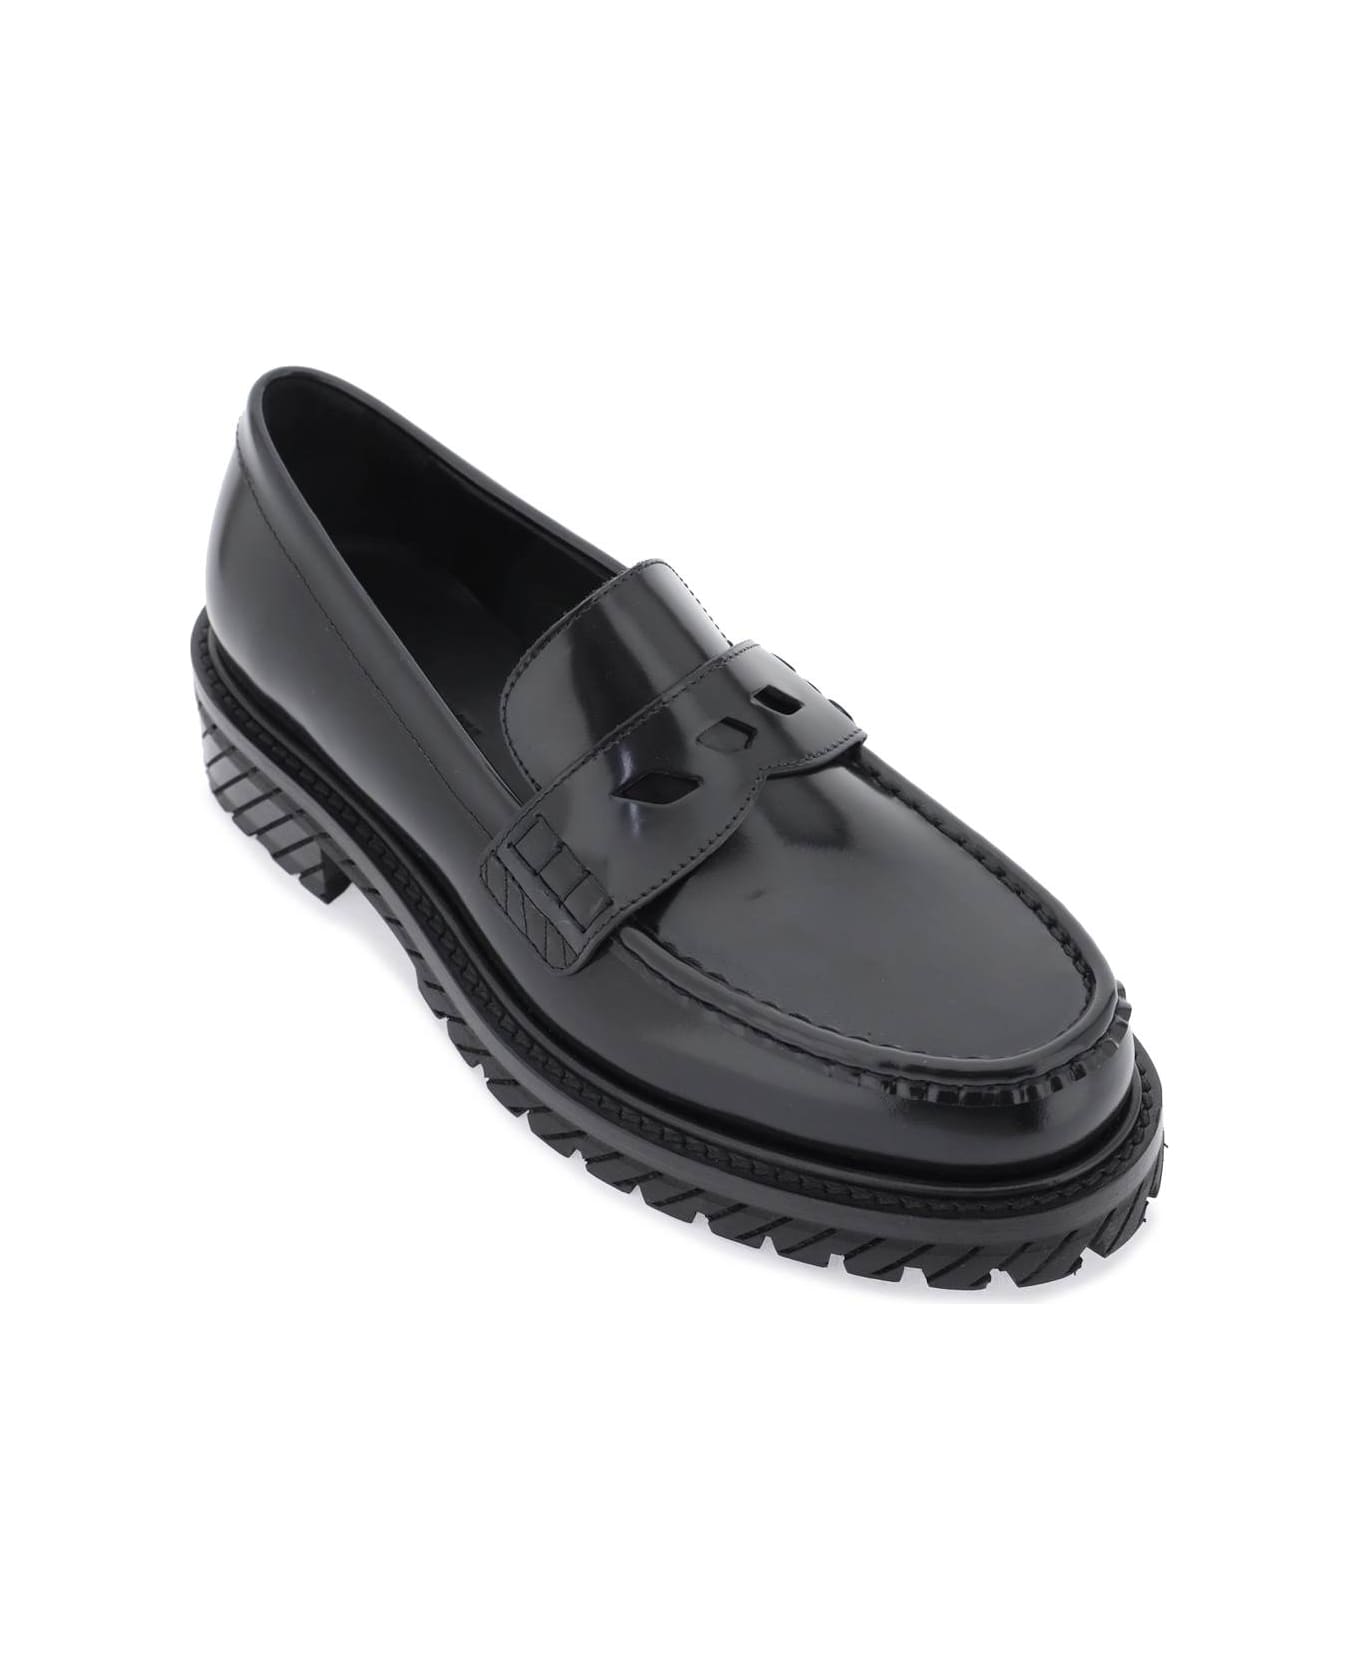 Off-White Leather Loafers - BLACK BLACK (Metallic)